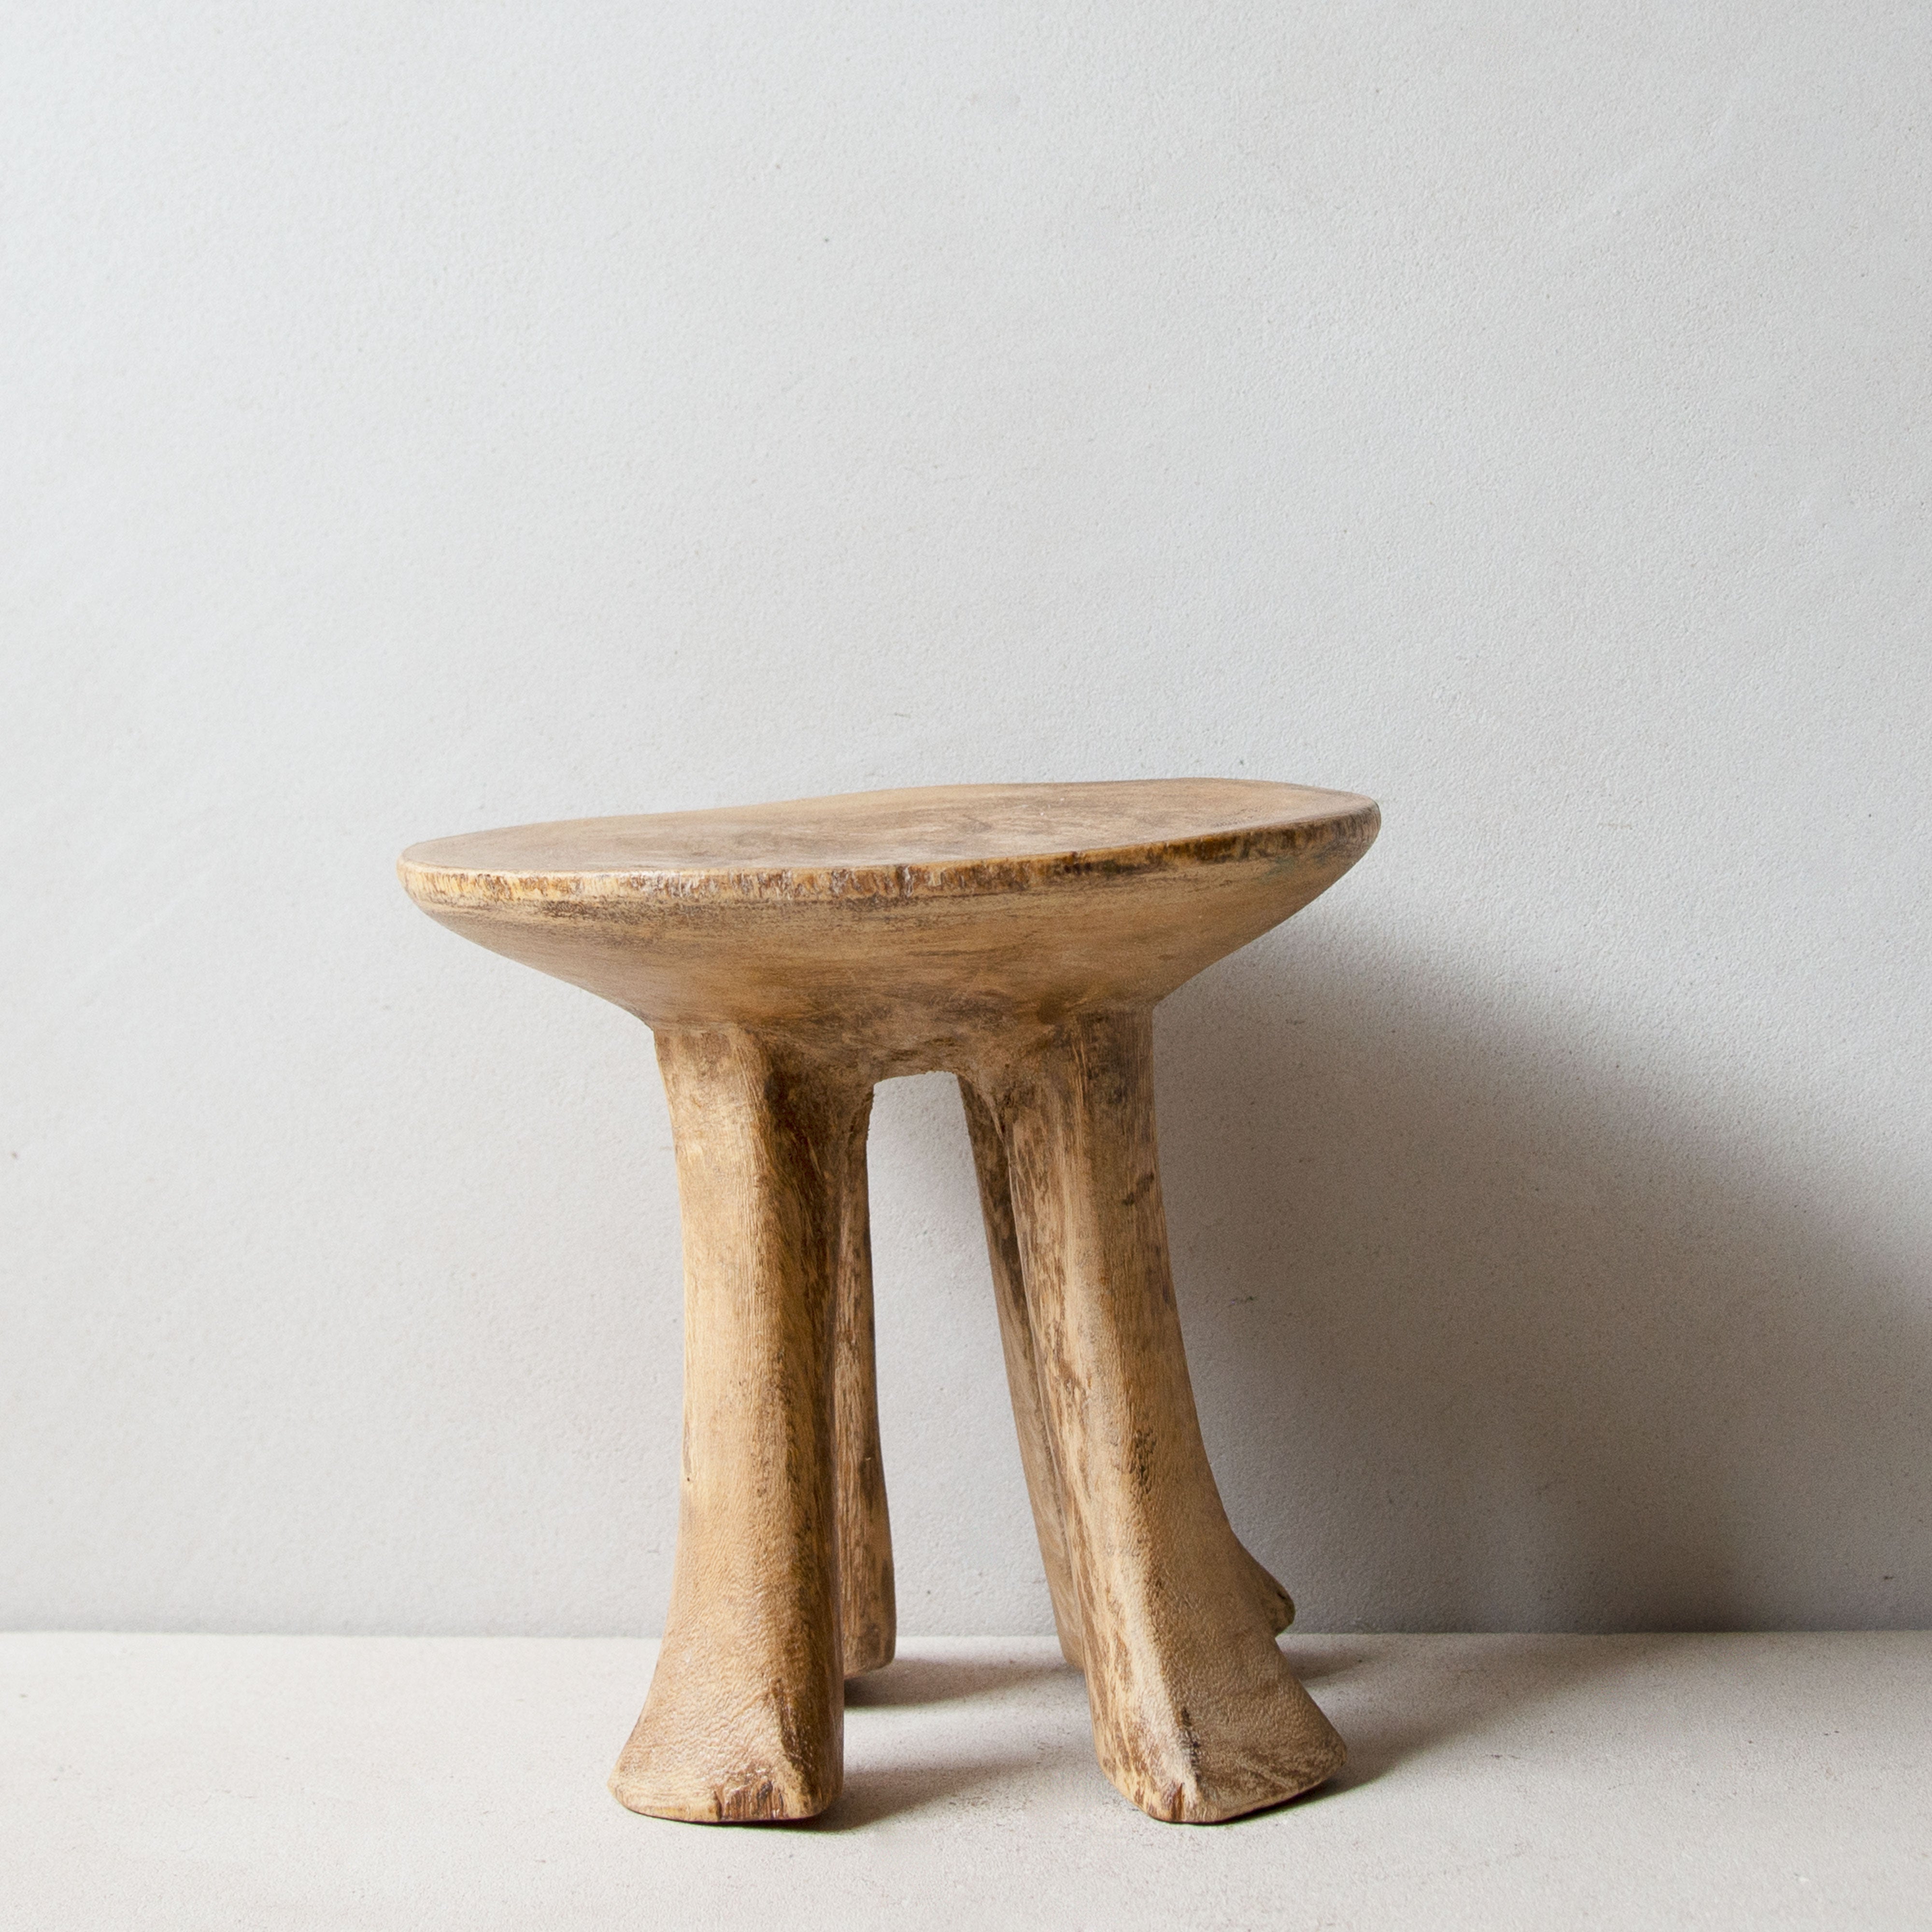 Front view of Khayni's hand-carved Pokot stool No.11